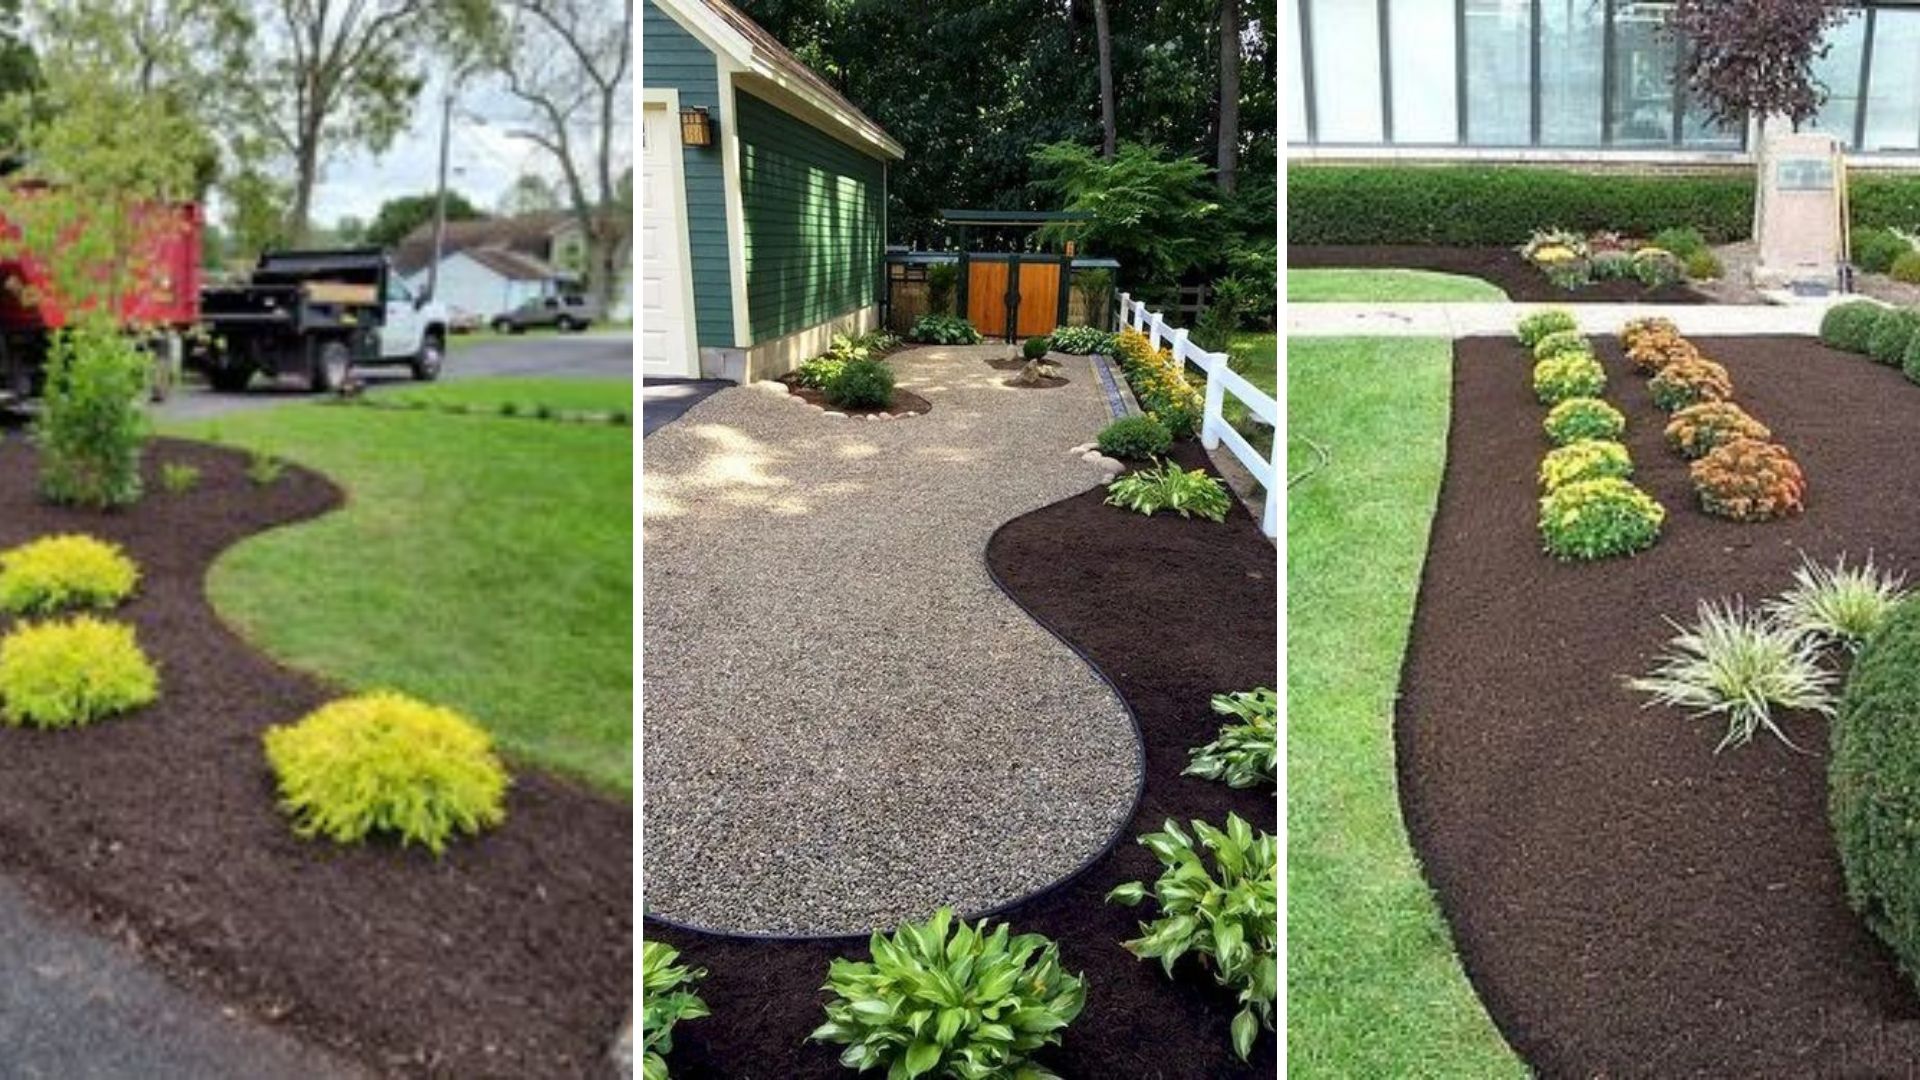 3 designs of landscaping.